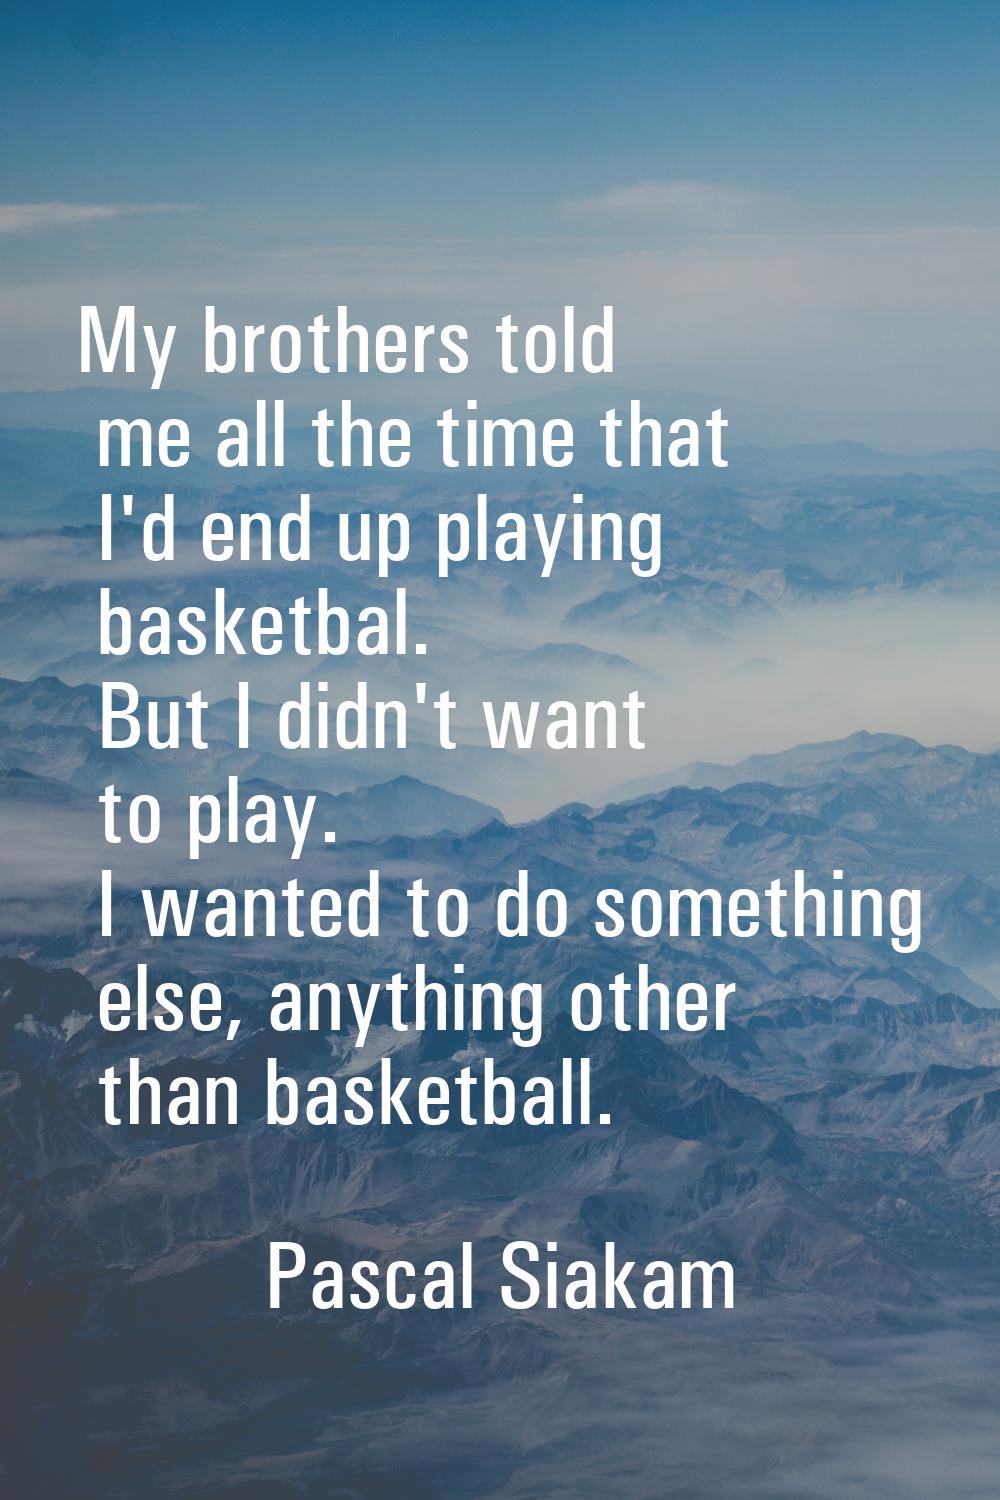 My brothers told me all the time that I'd end up playing basketbal. But I didn't want to play. I wa